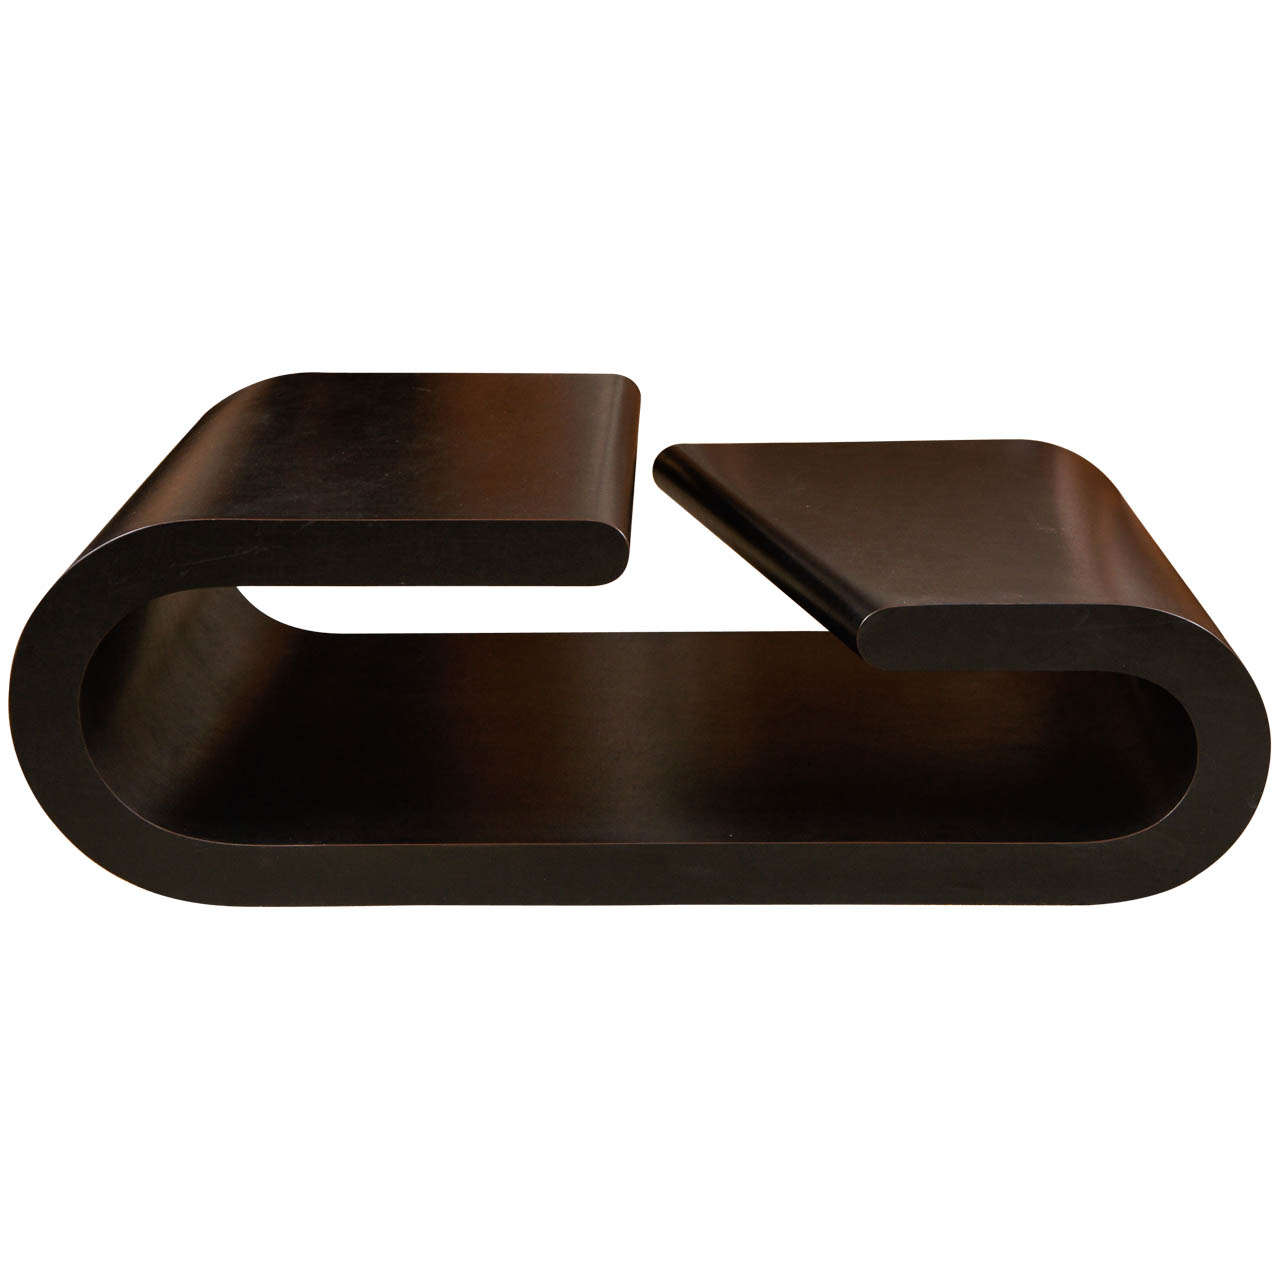 A Chic Black Coffee Table